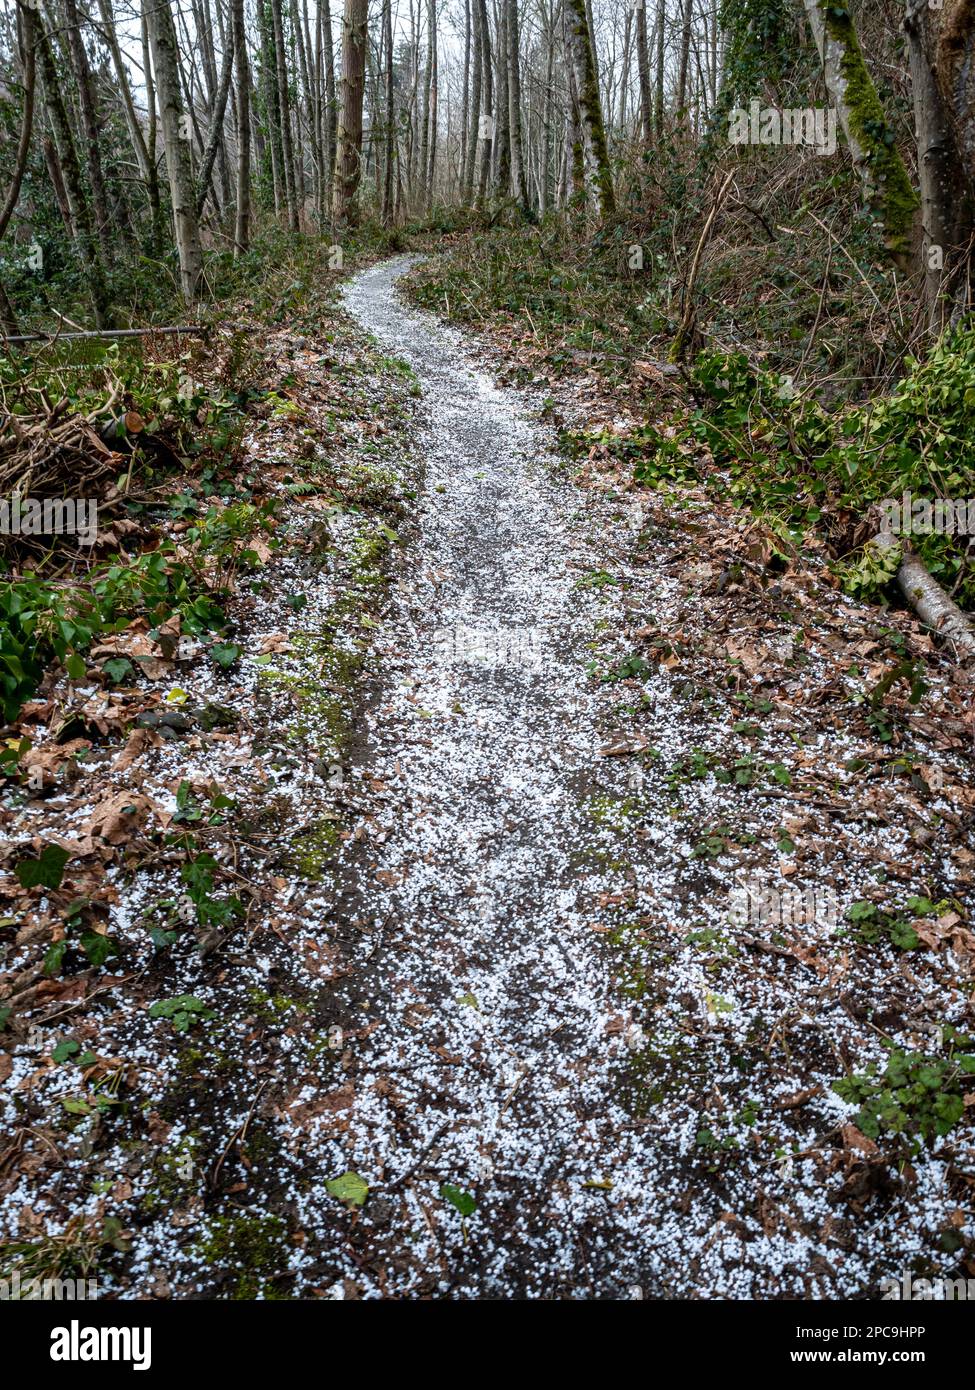 WA23250-00...WASHINGTON - Trail covered with hail at Mukilteo's Trails and Tails Dog Park. Stock Photo